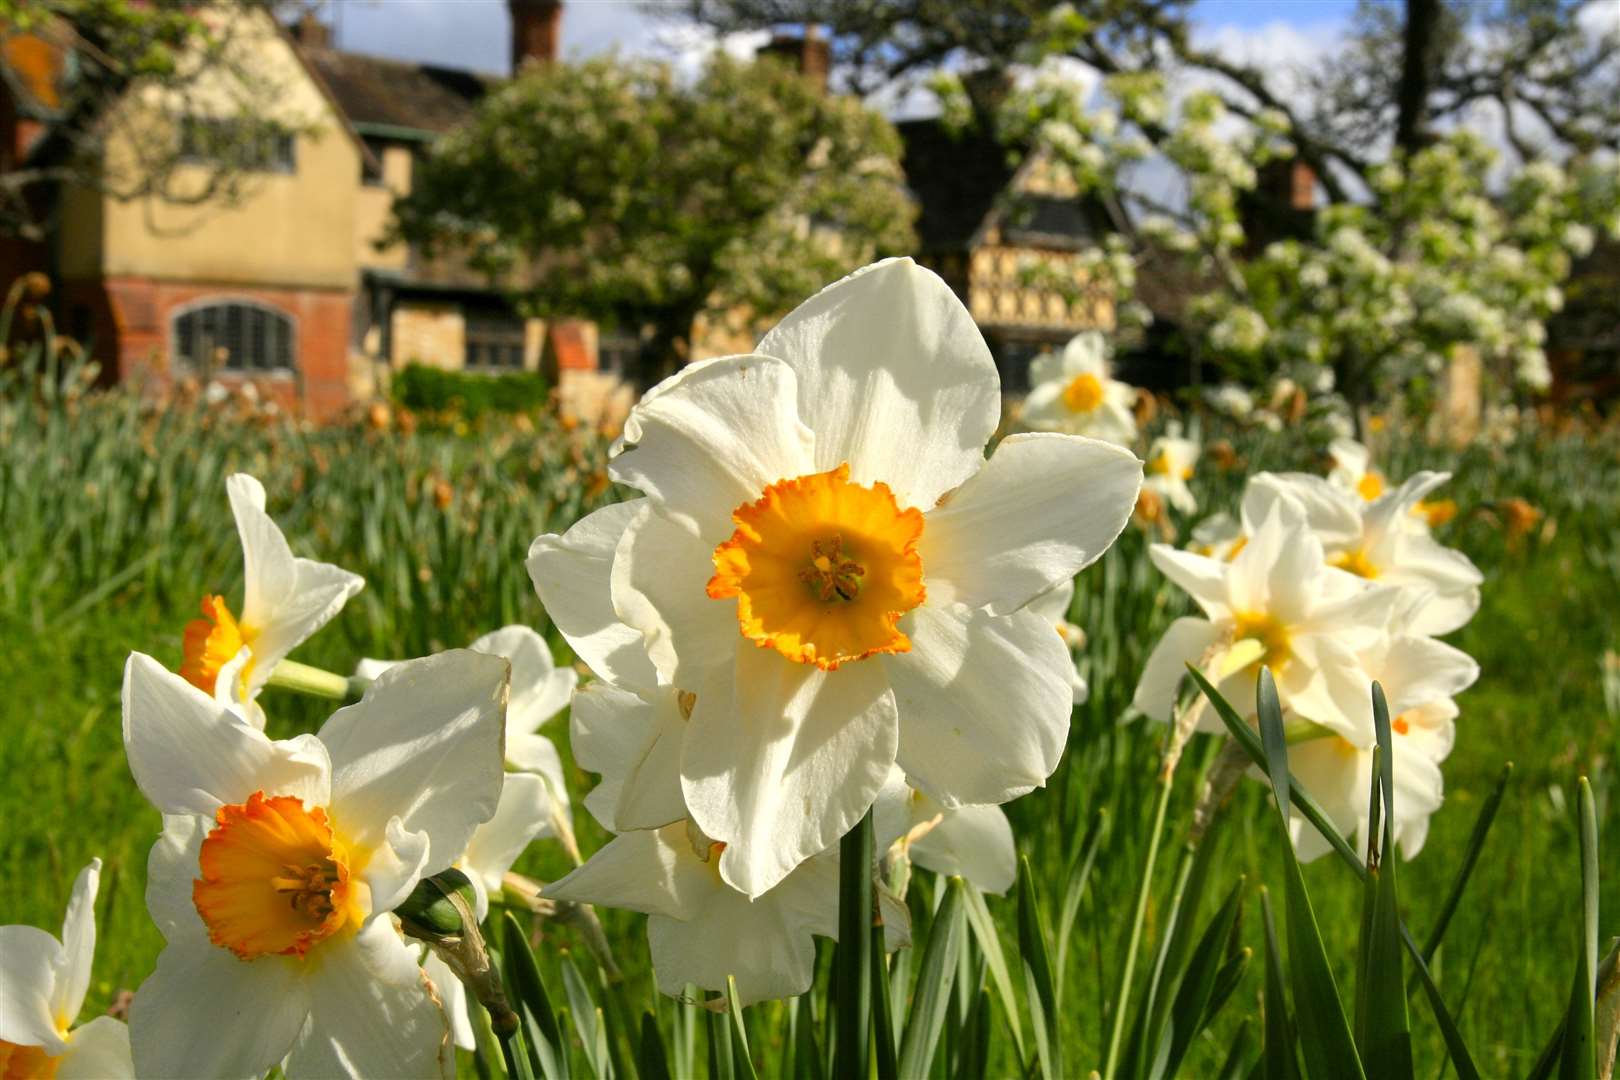 Dazzling Daffodils at Hever (31145908)